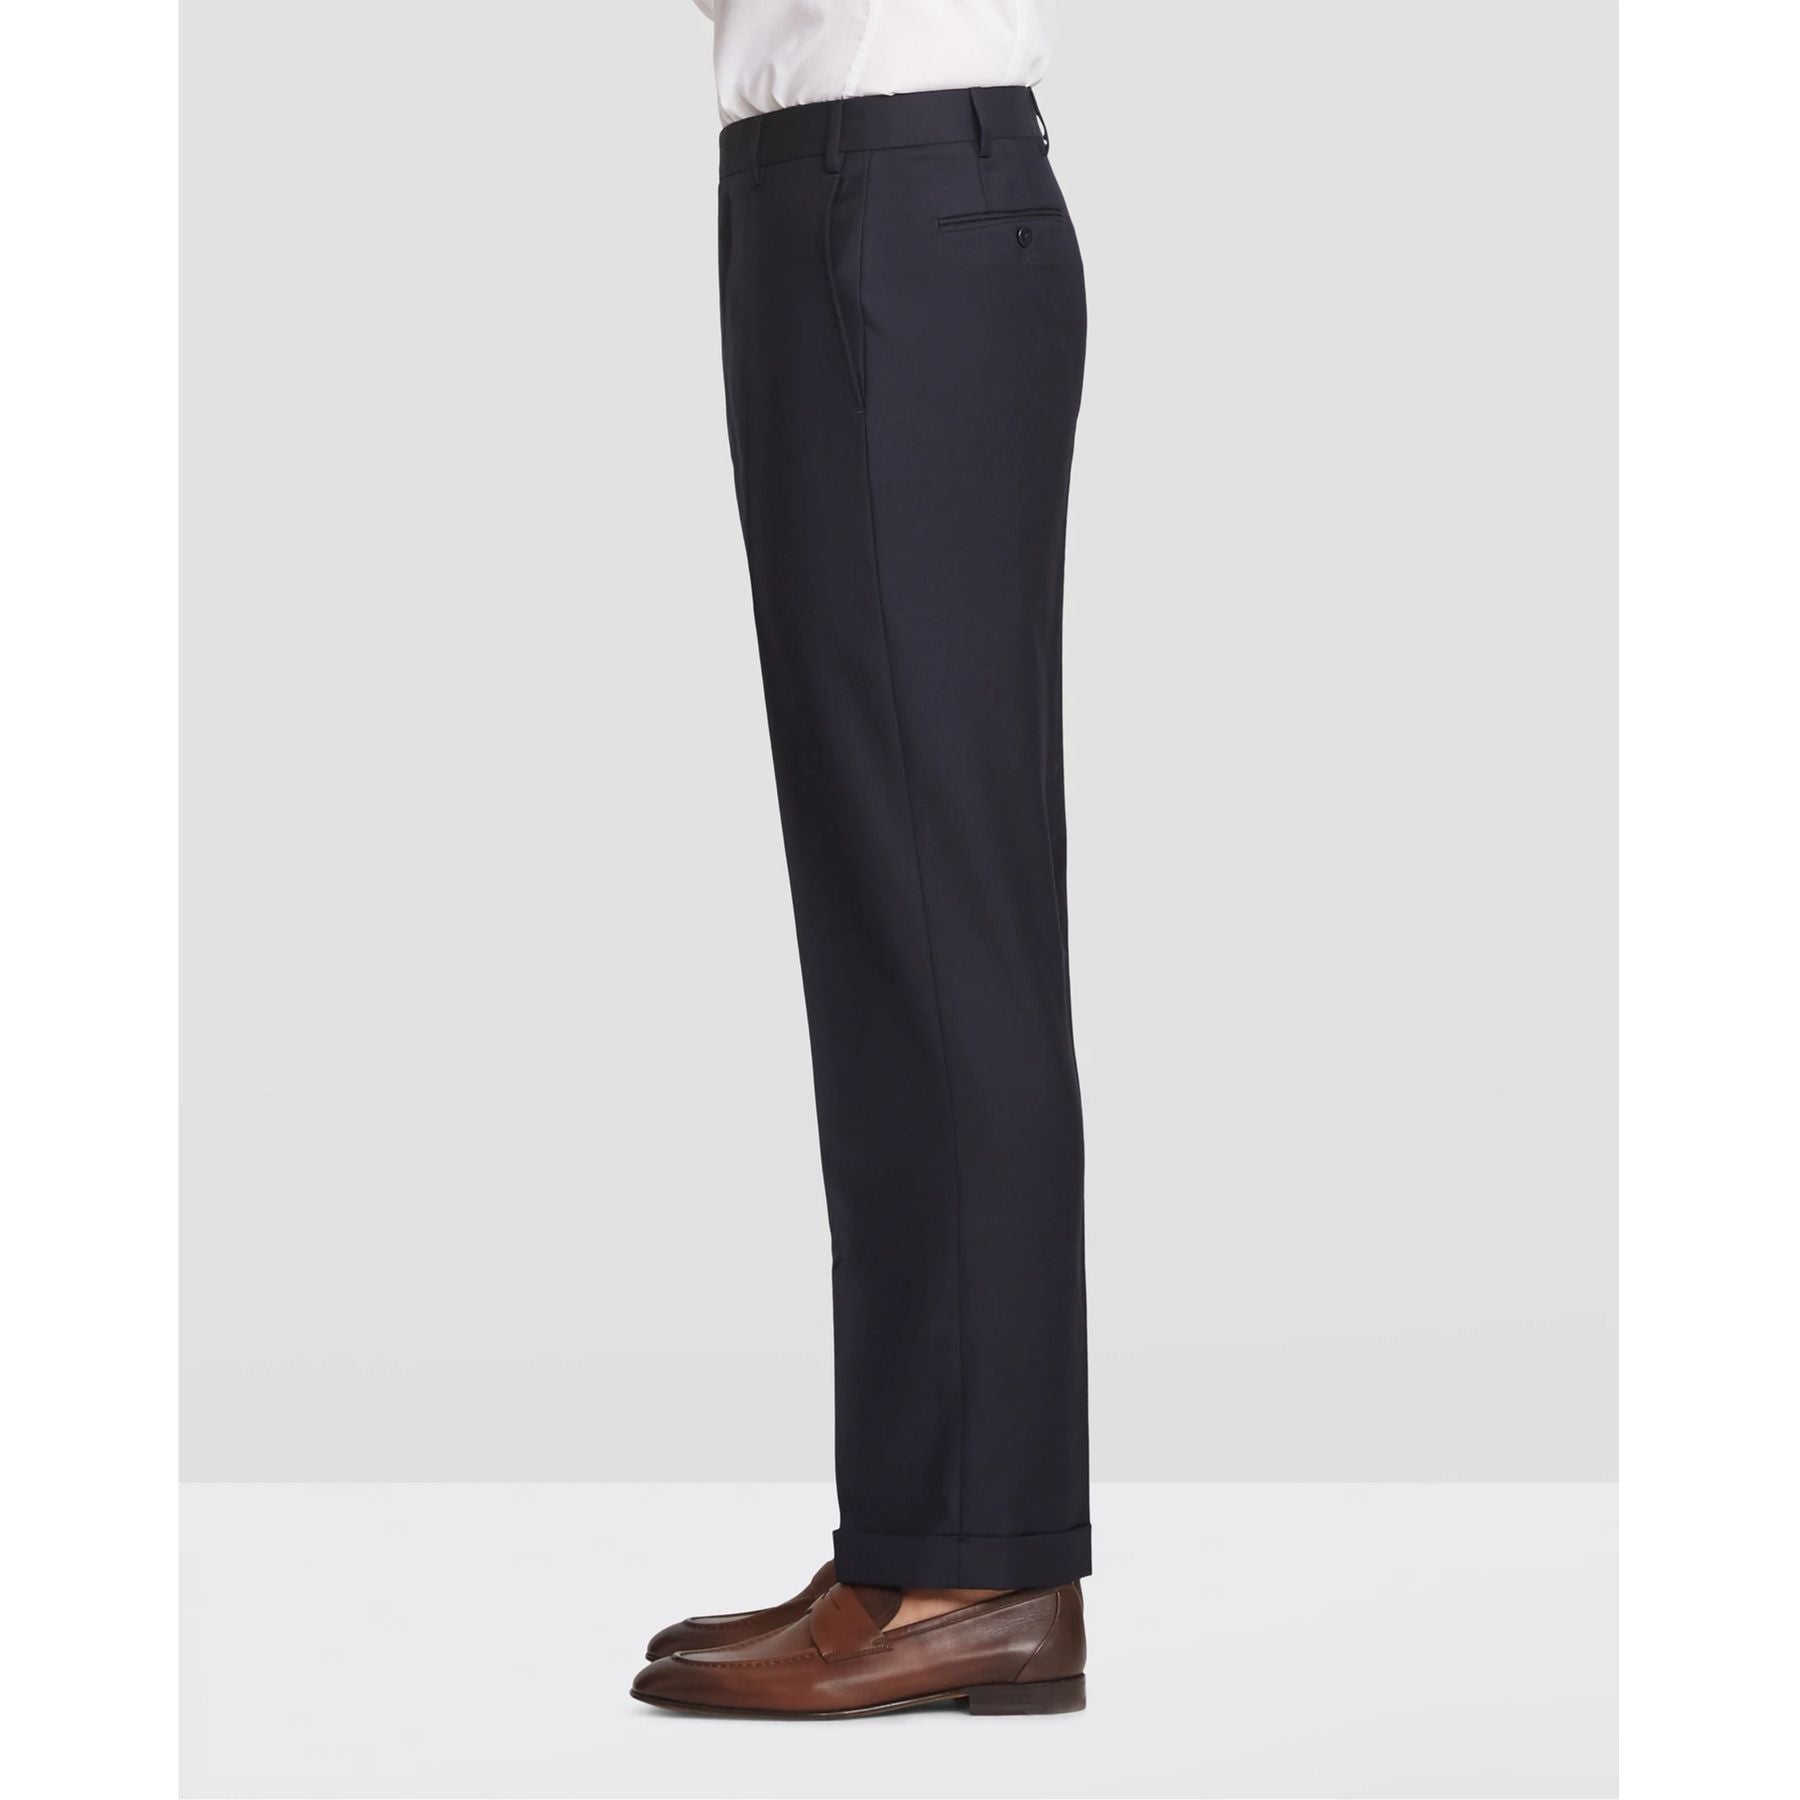 Todd Flat Front Super 120s Wool Serge Trouser in Navy (Full Fit) by Zanella